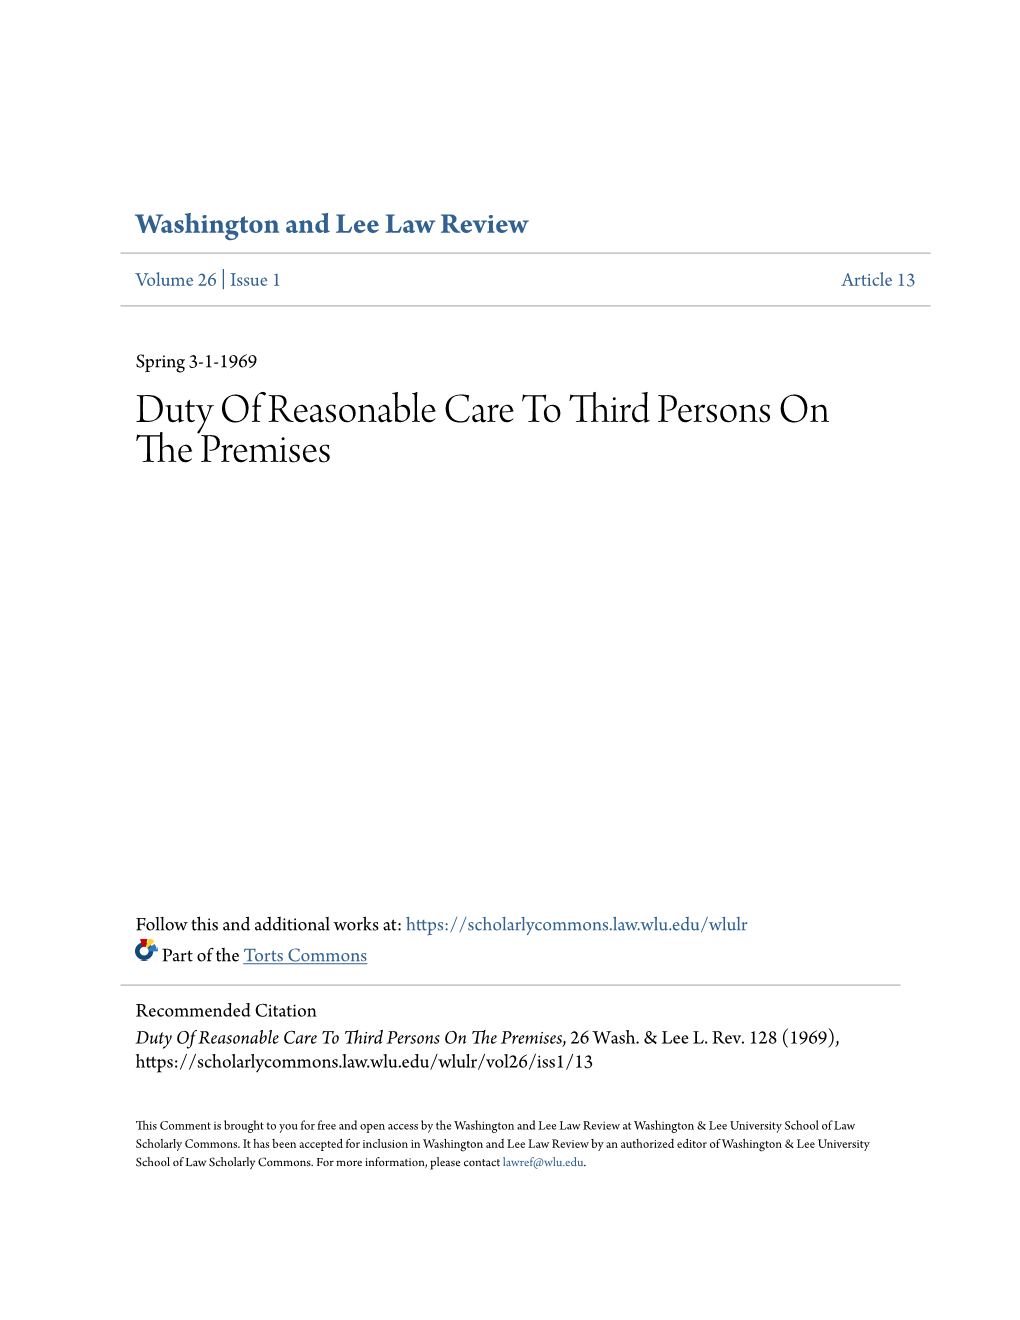 Duty of Reasonable Care to Third Persons on the Premises, 26 Wash